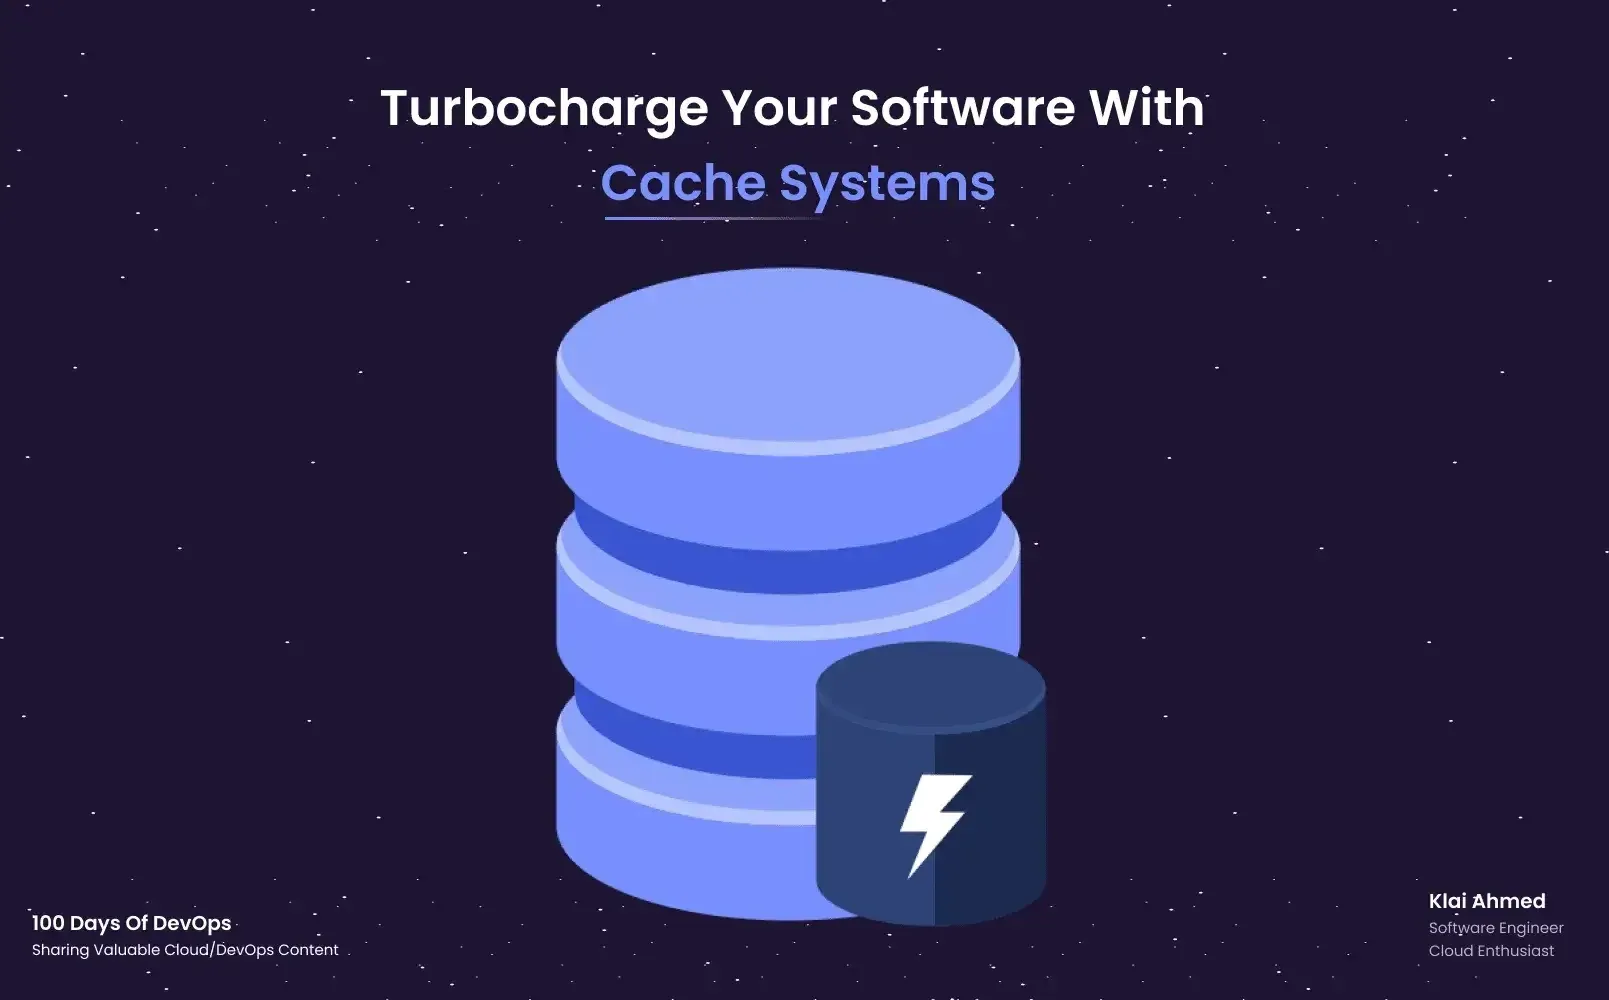 Turbocharge Your Software: Der ultimative Guide für Caching-Systems!